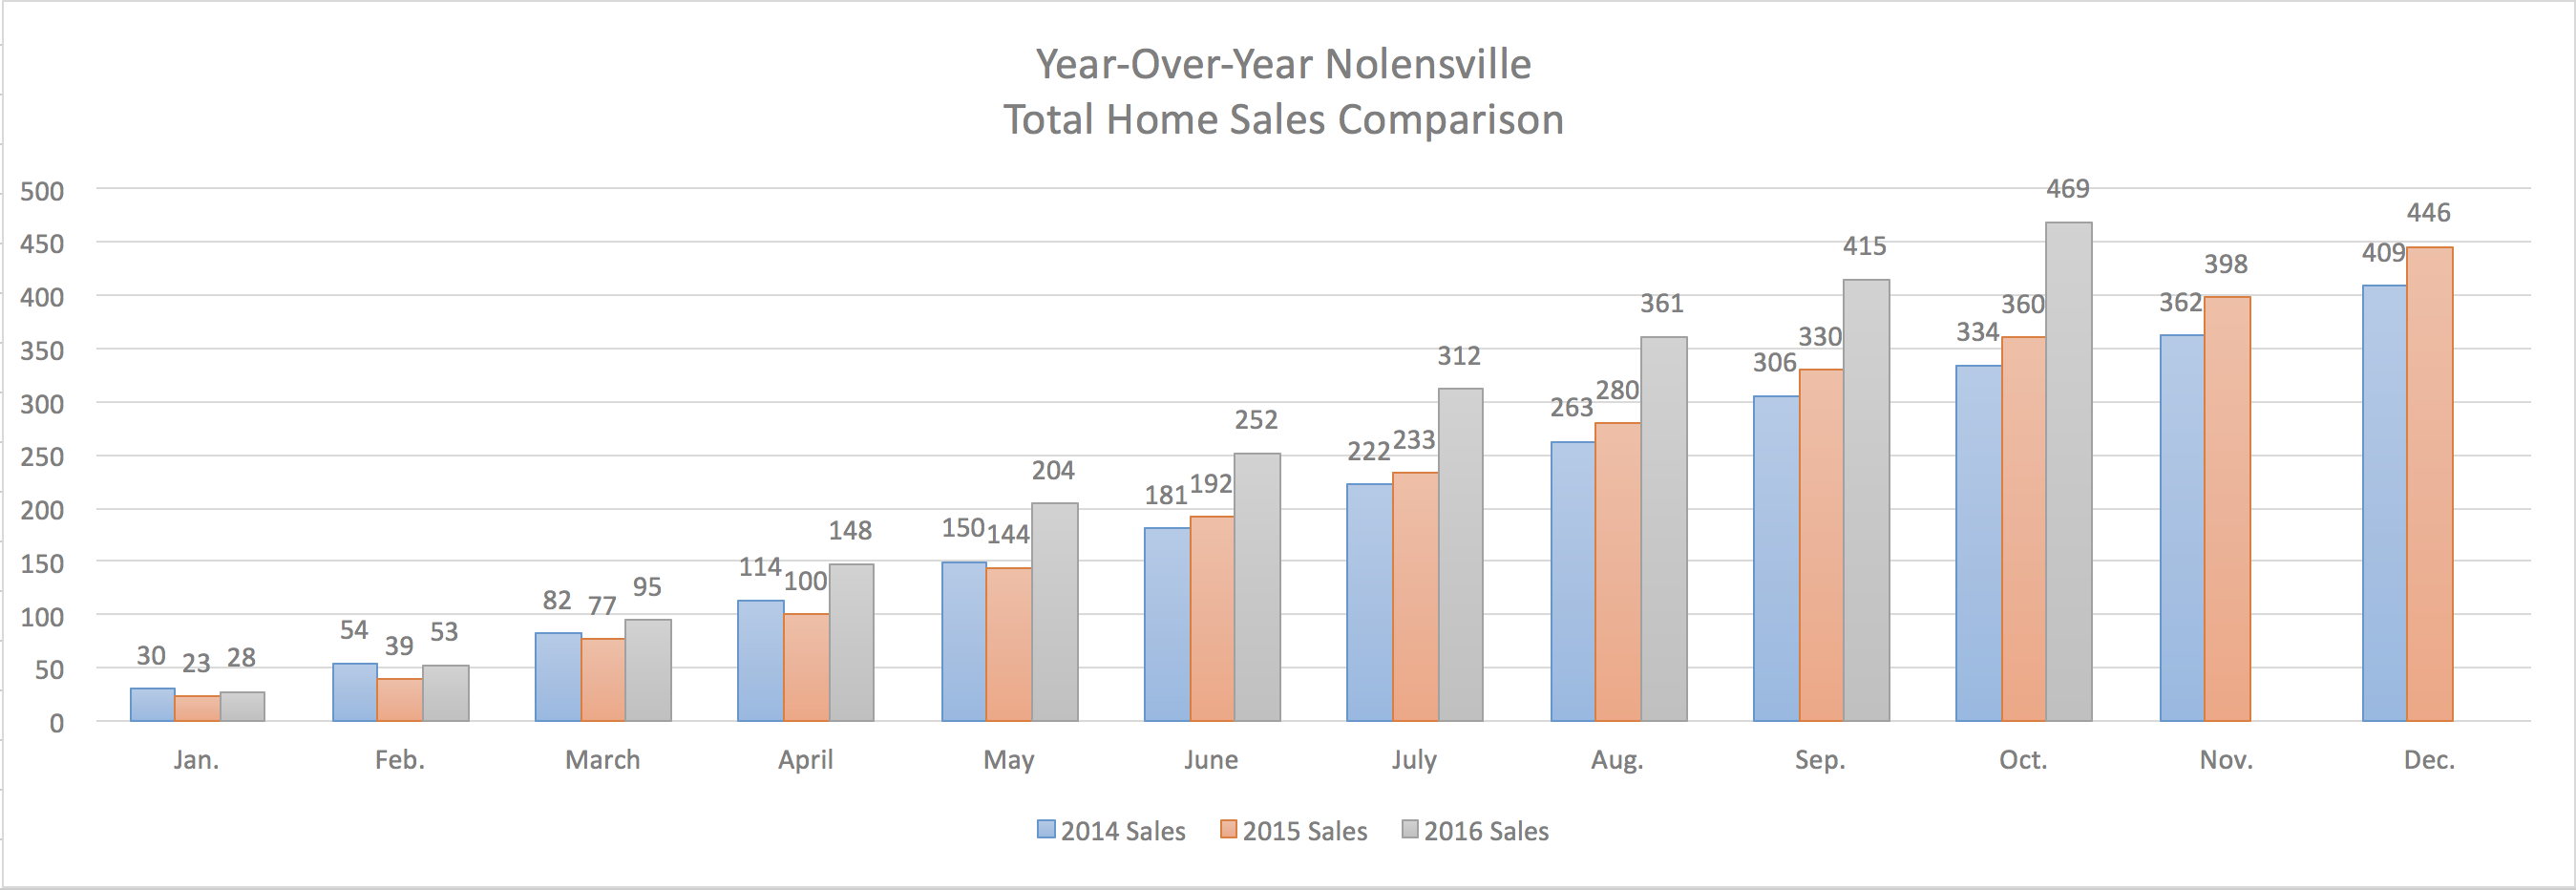 Nolensville Year-Over-Year Home Sales Through October 2016